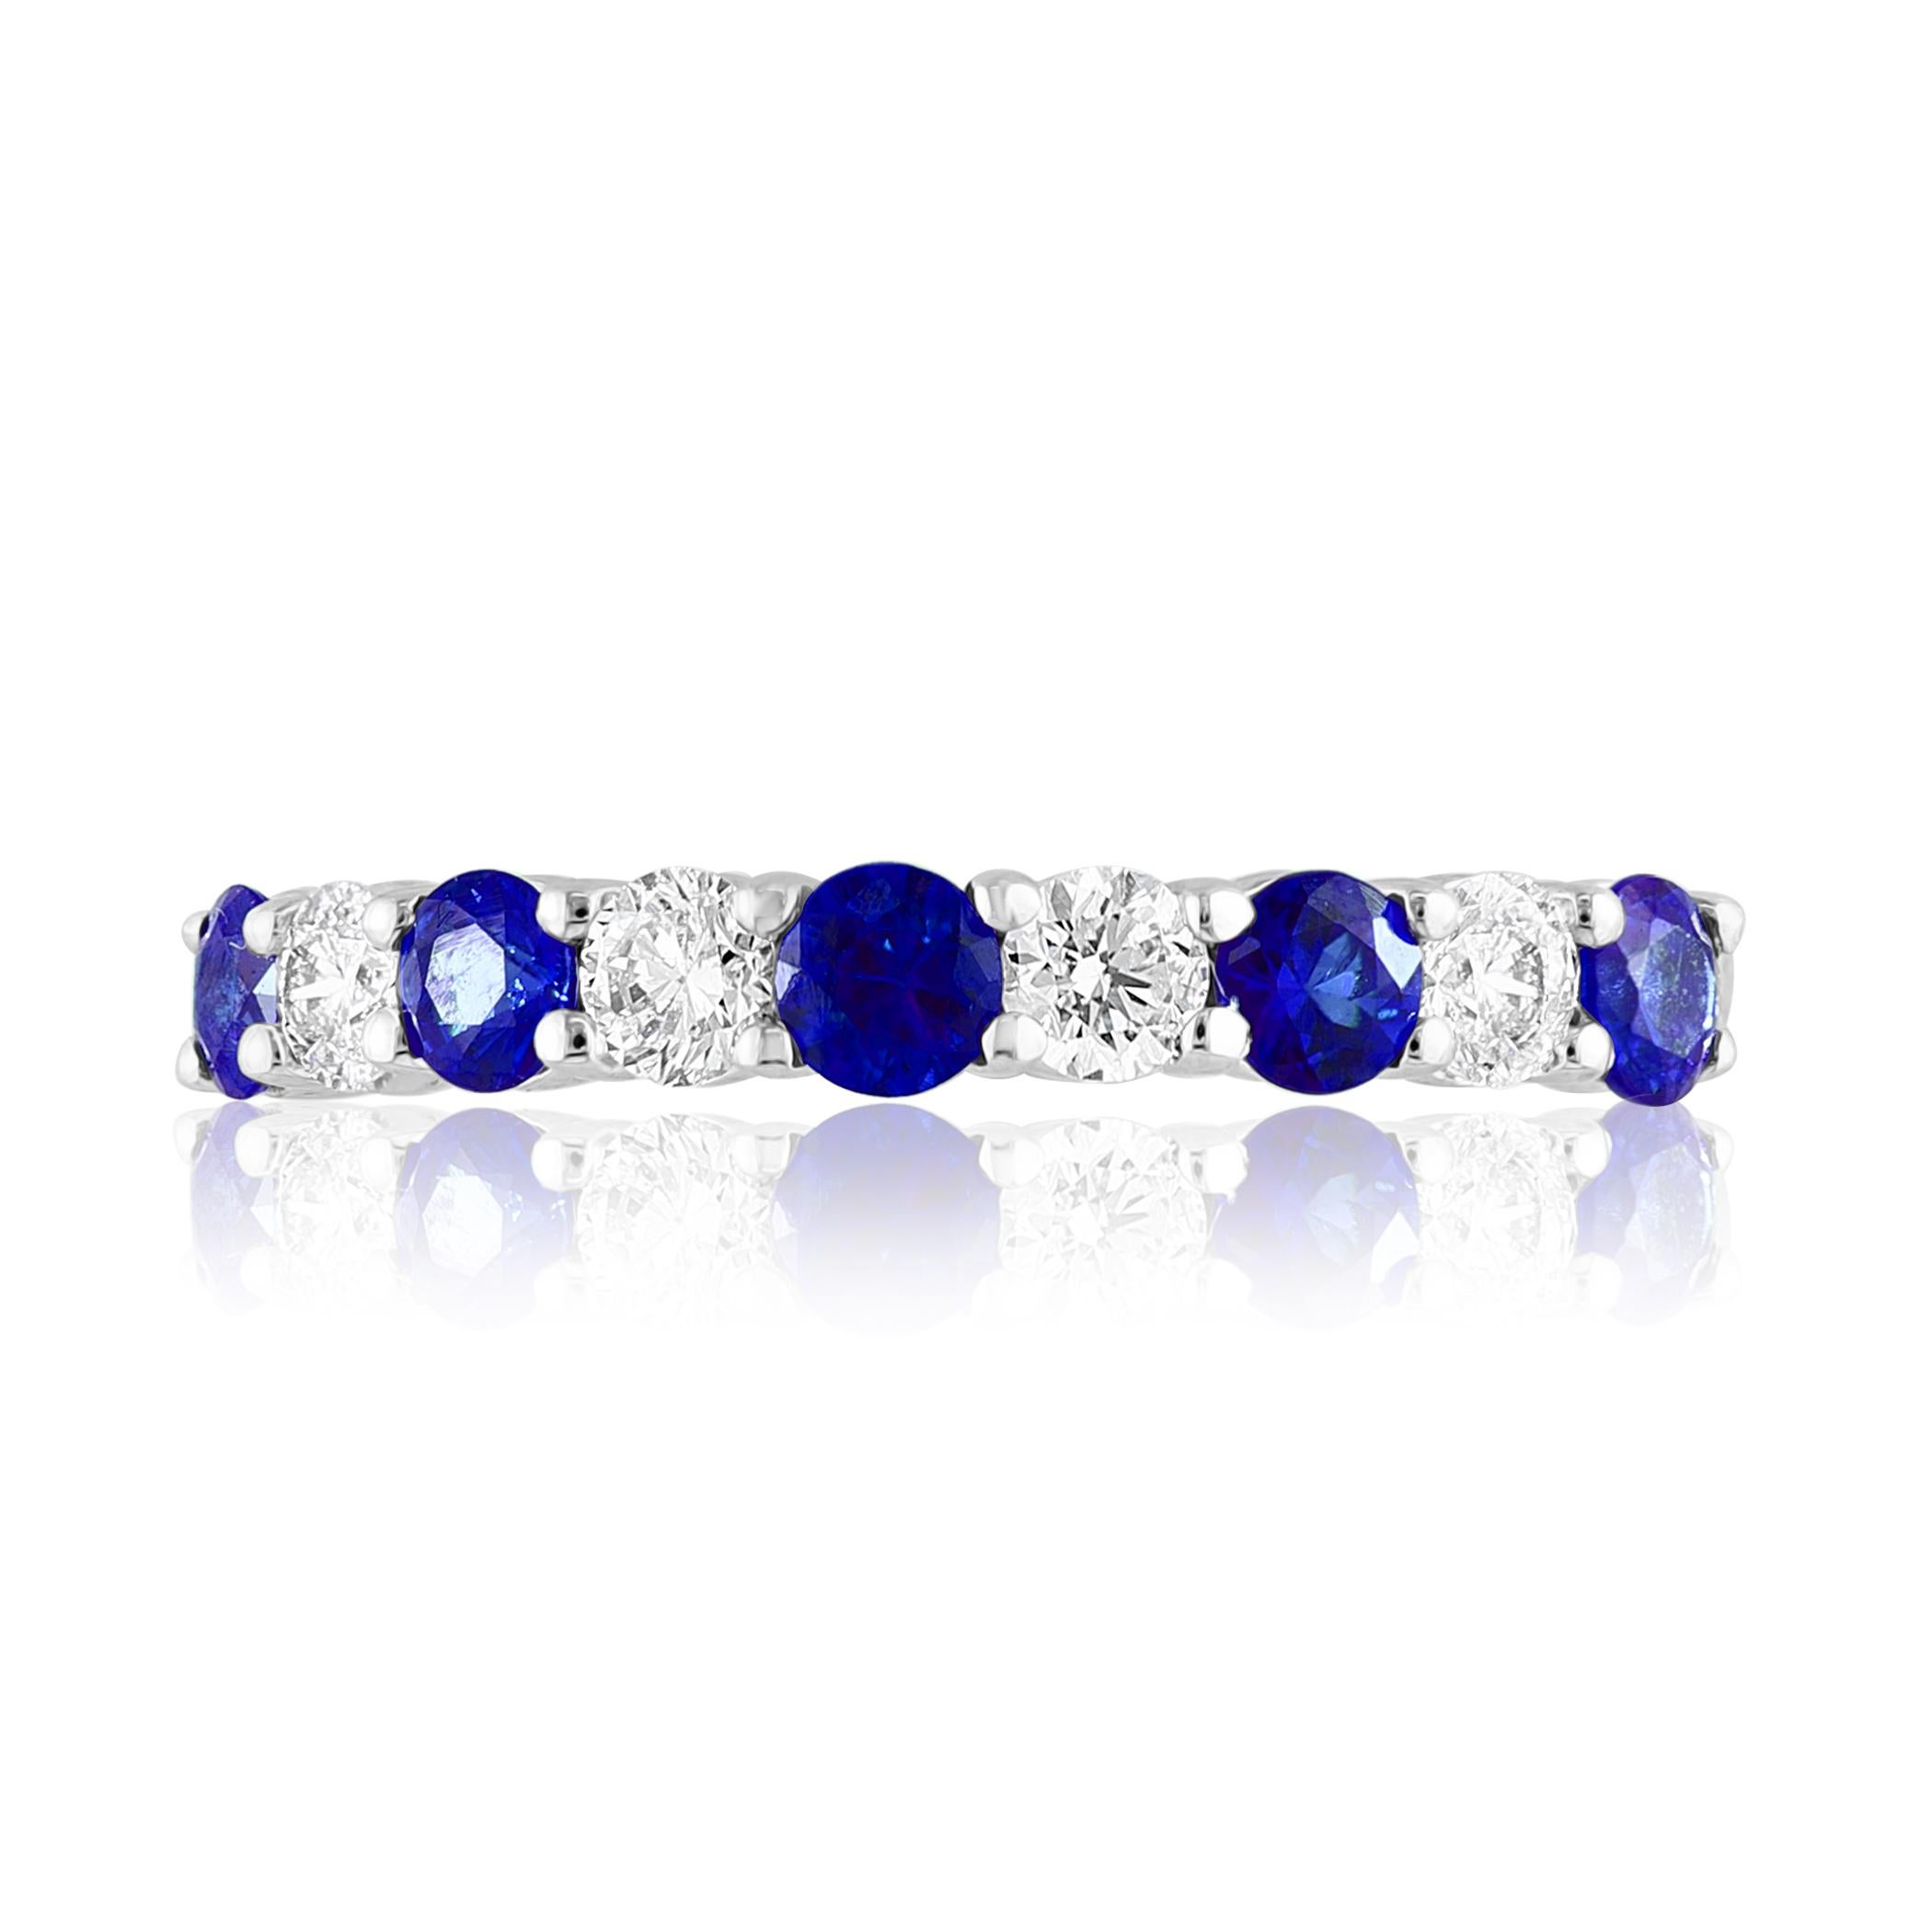 This band features 0.60 carat total weight in natural round diamonds alternating with 0.55 carat total weight in natural round blue sapphires set in 14 karat white gold. Wear with your other favorite rings or alone! This ring is a size 6.25 but can